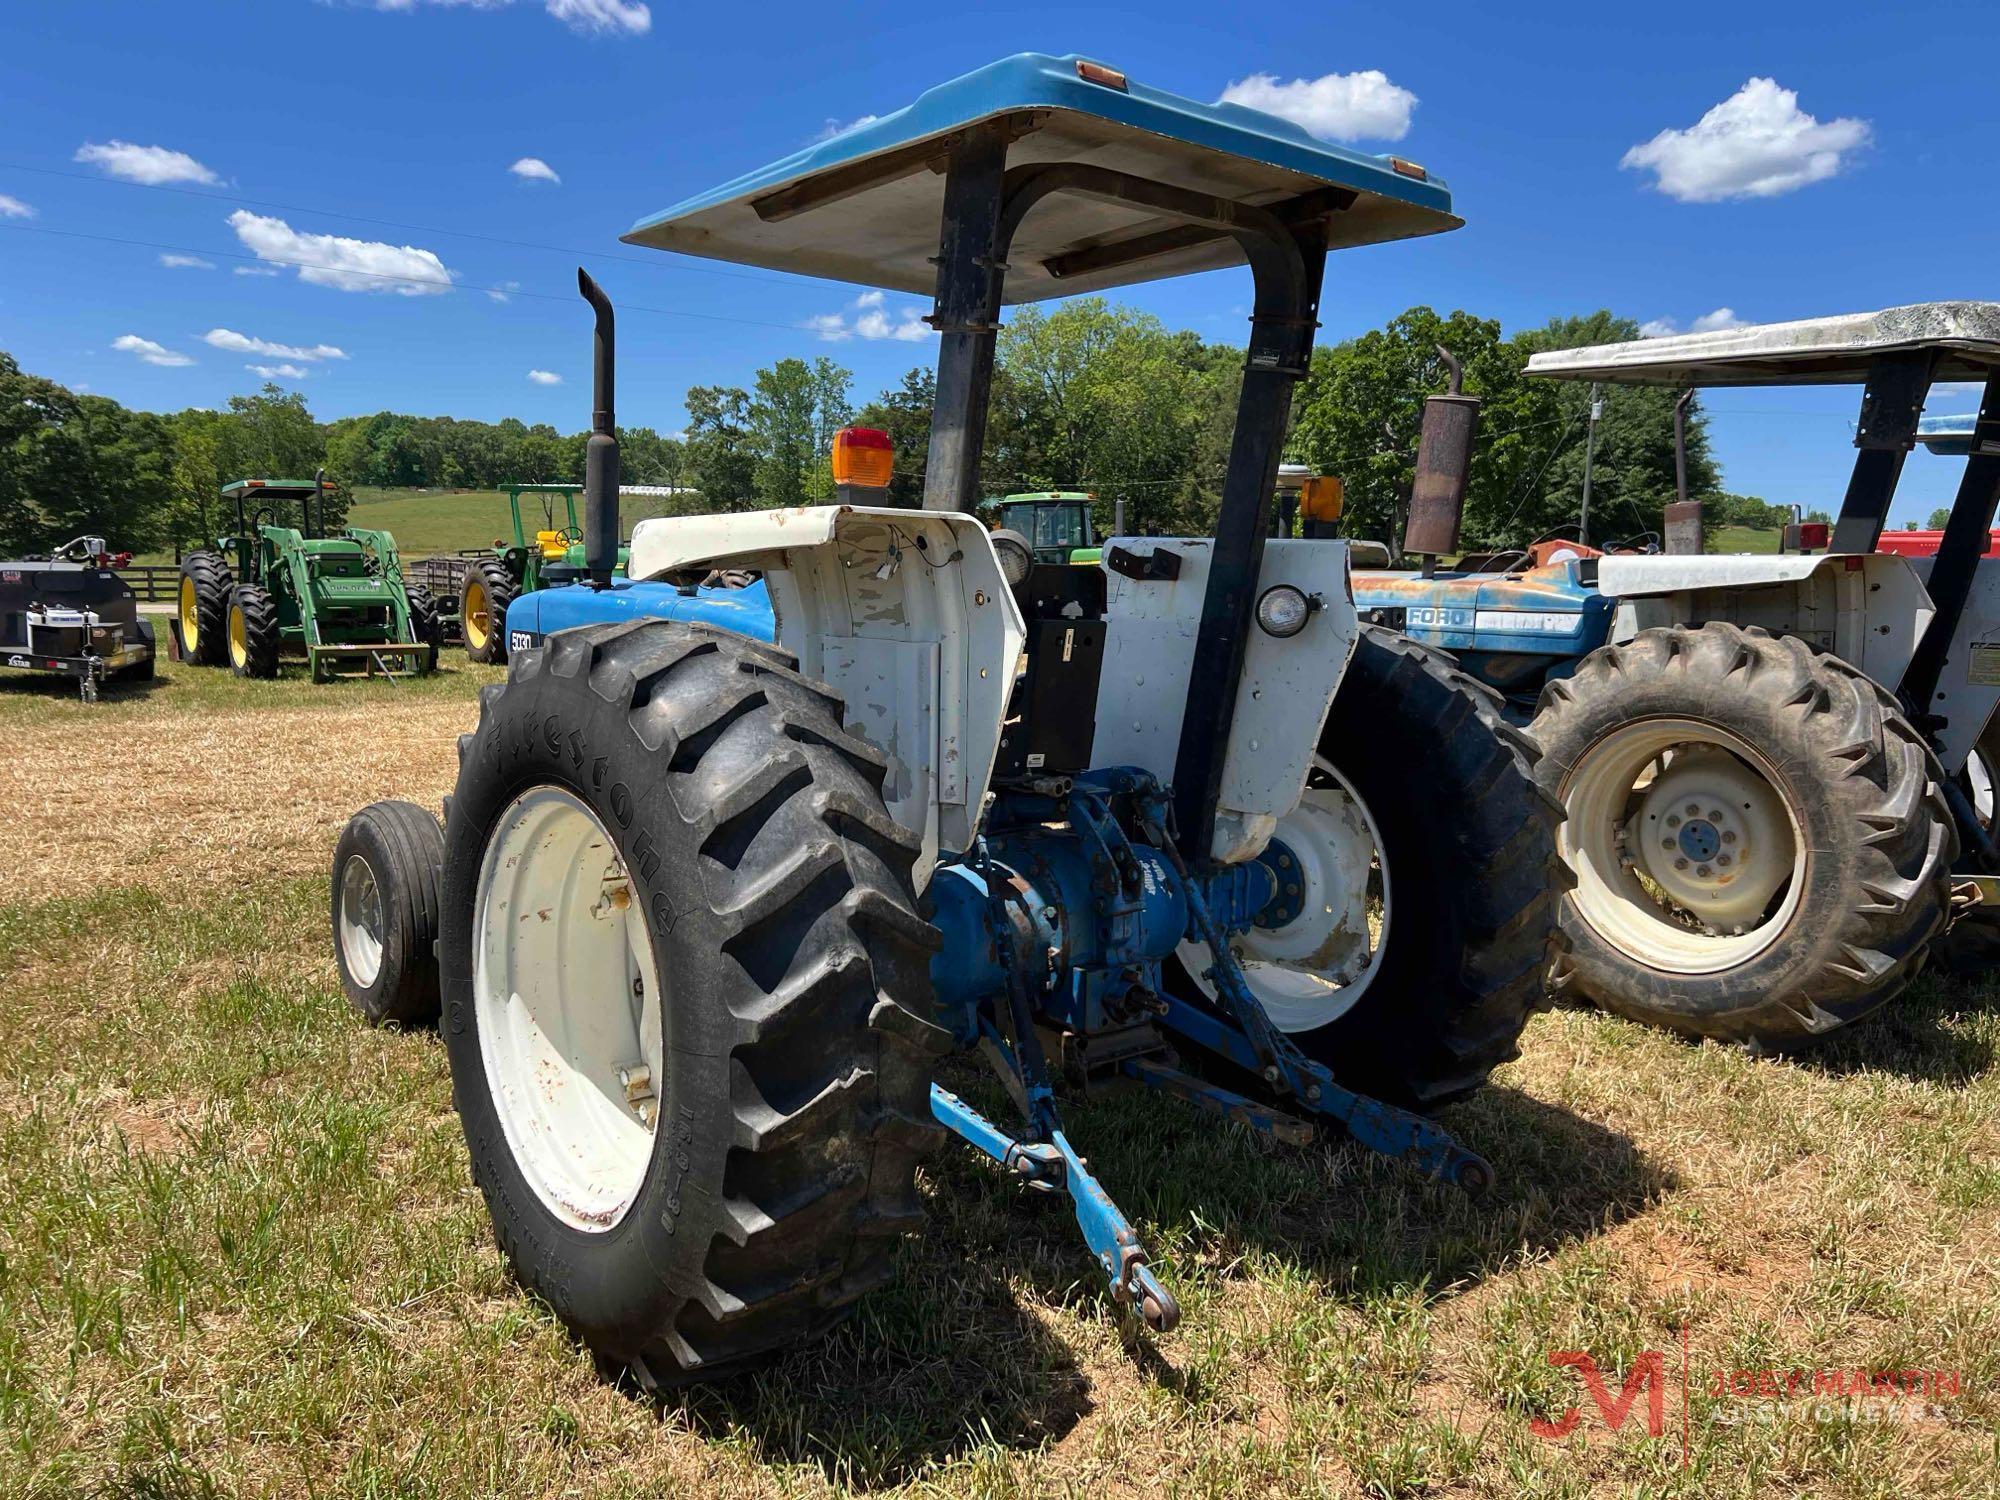 NEW HOLLAND 5030 AG TRACTOR